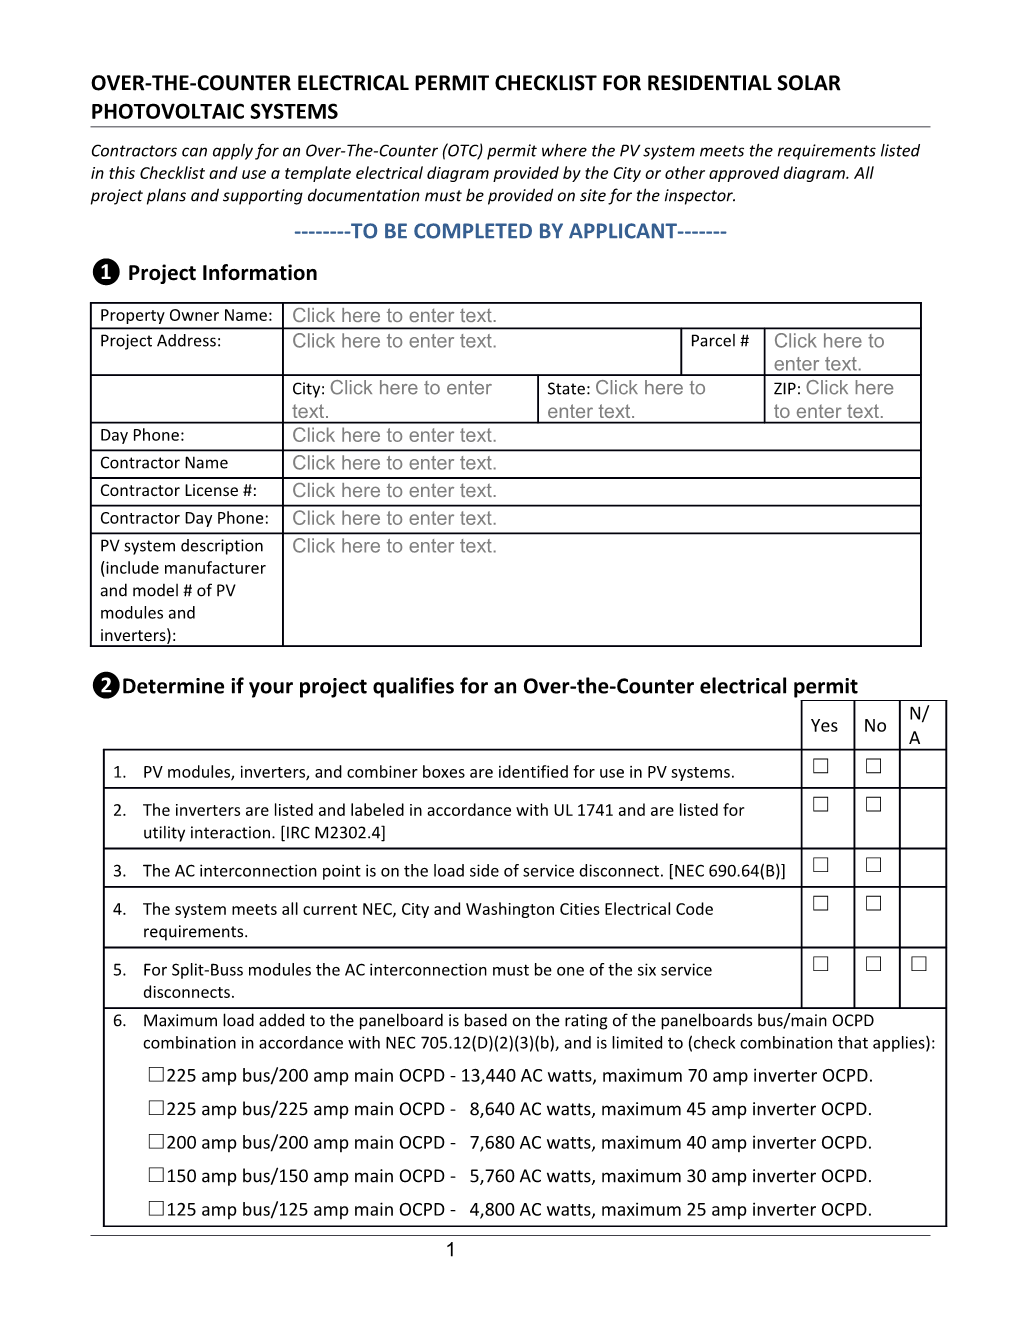 Over-The-Counter Electricalpermitchecklist for Residential Solar Photovoltaic Systems